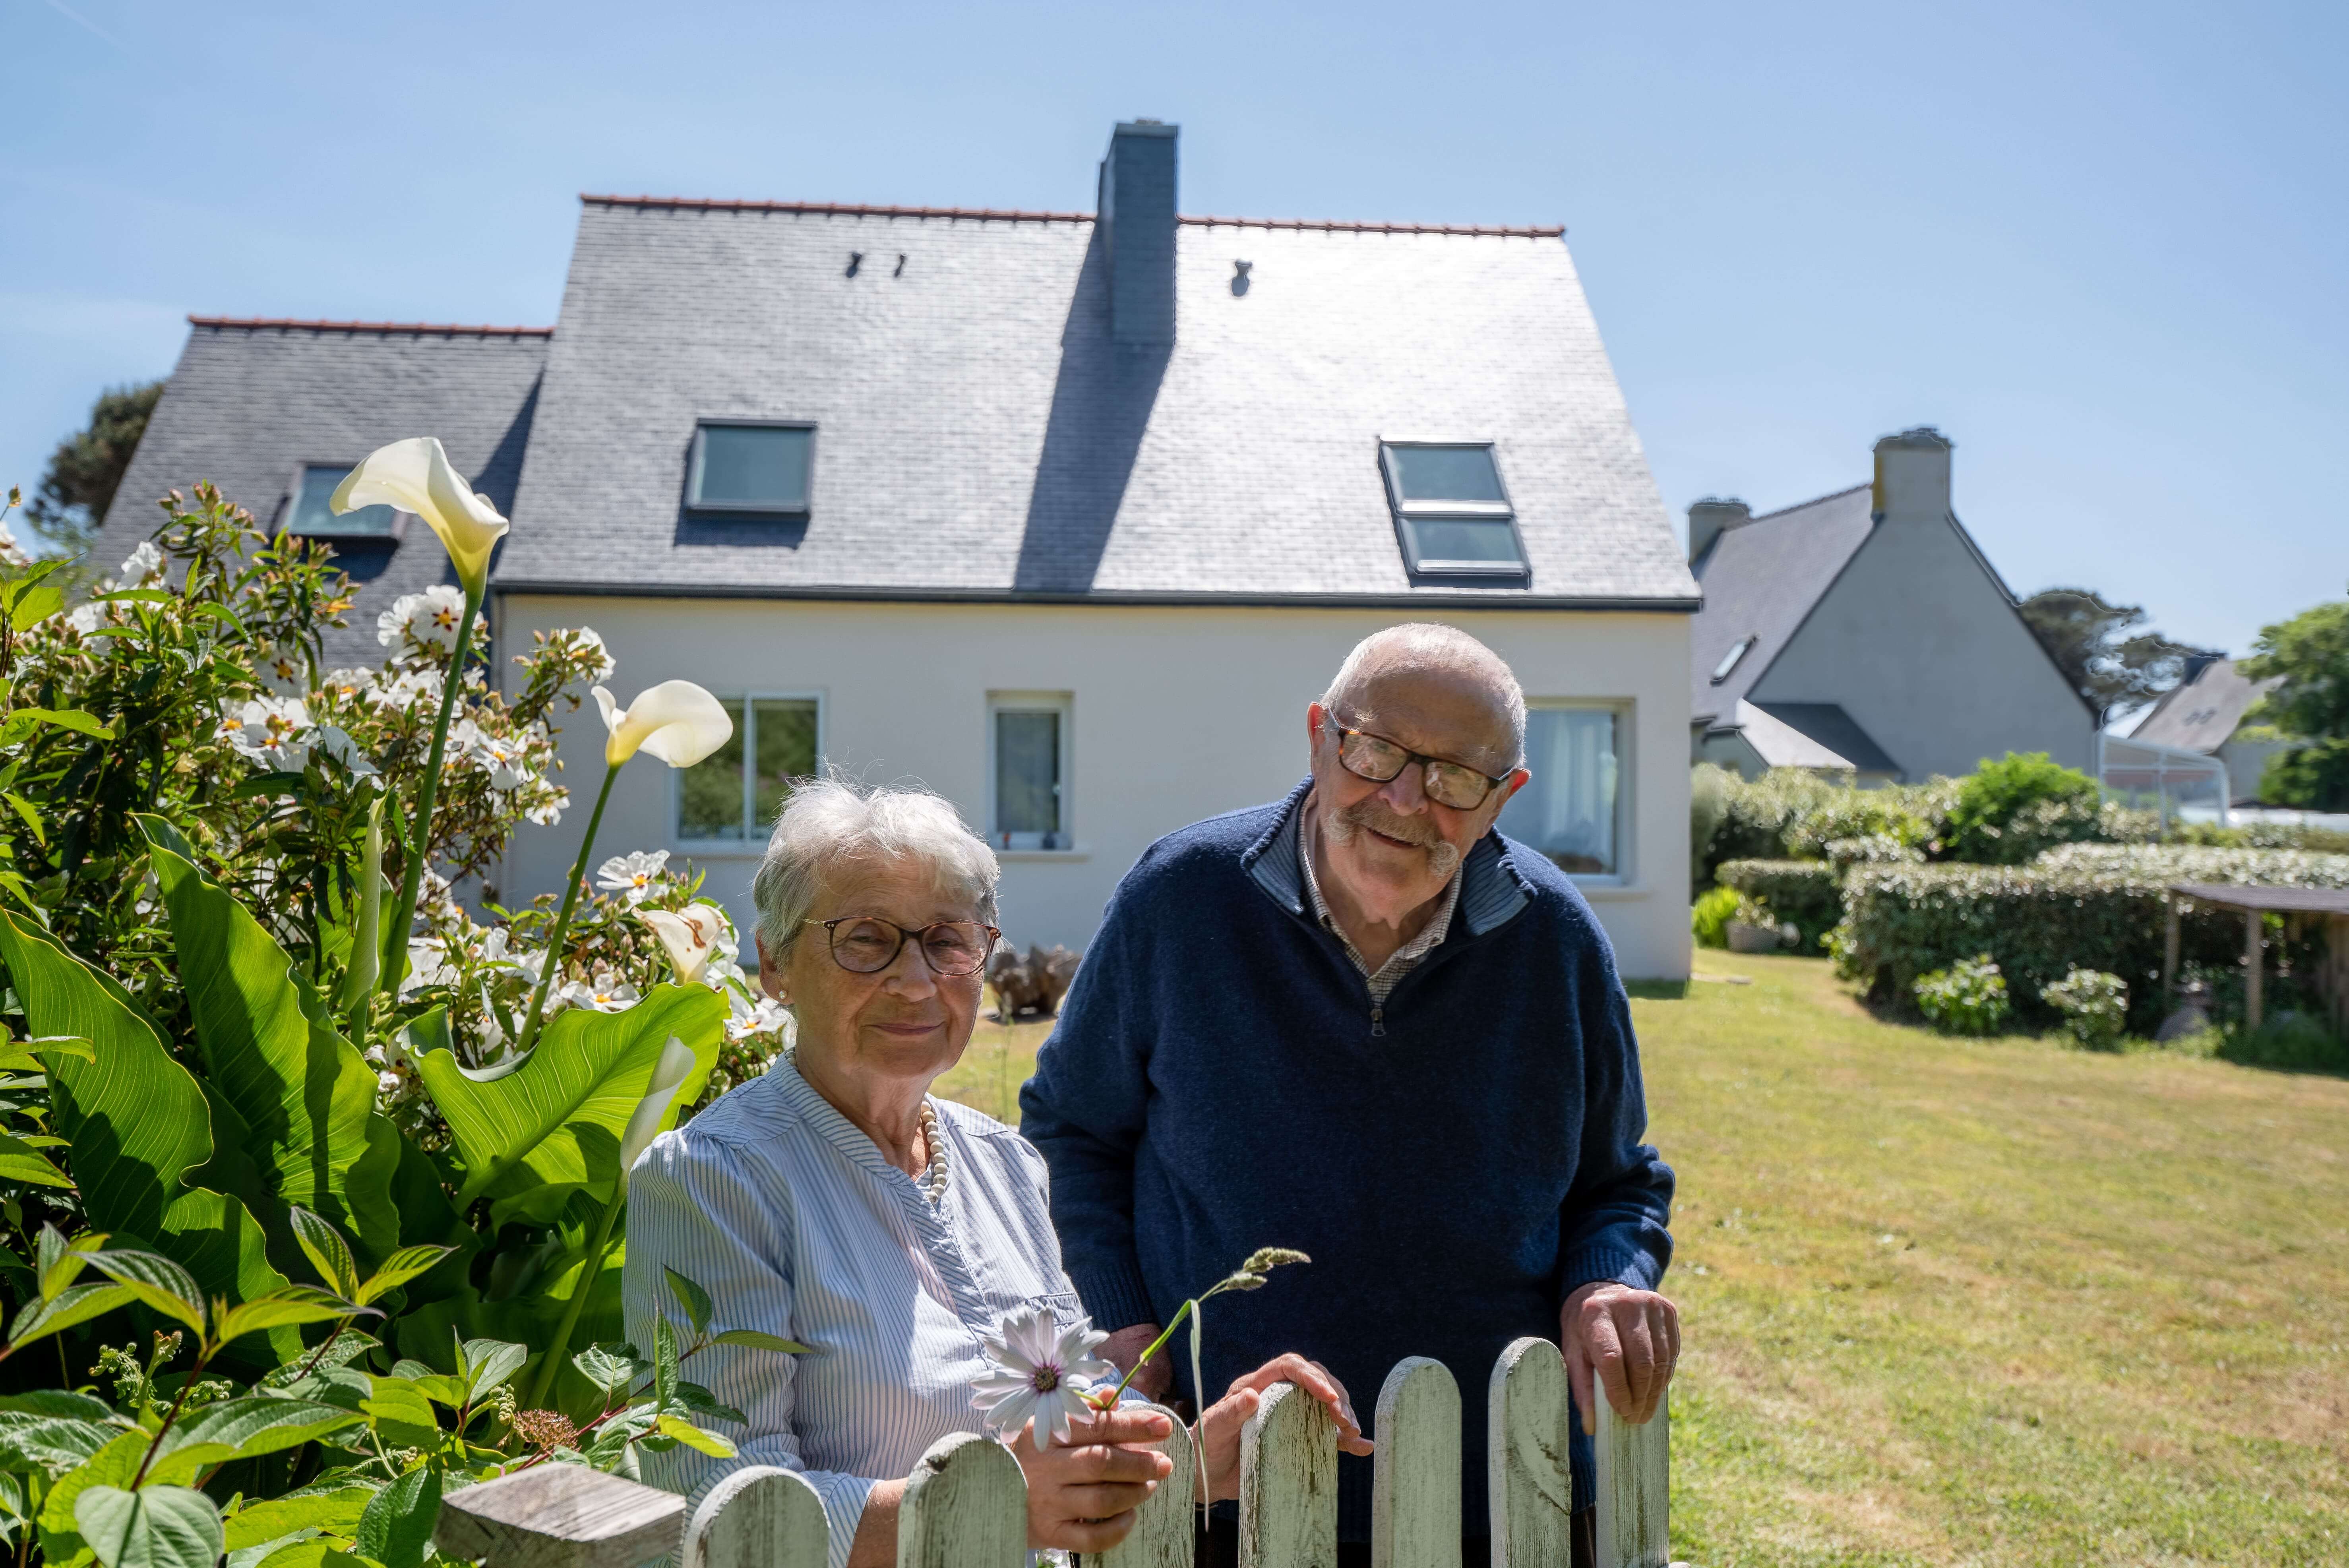 An elderly couple standing by the fence and their house is behind them